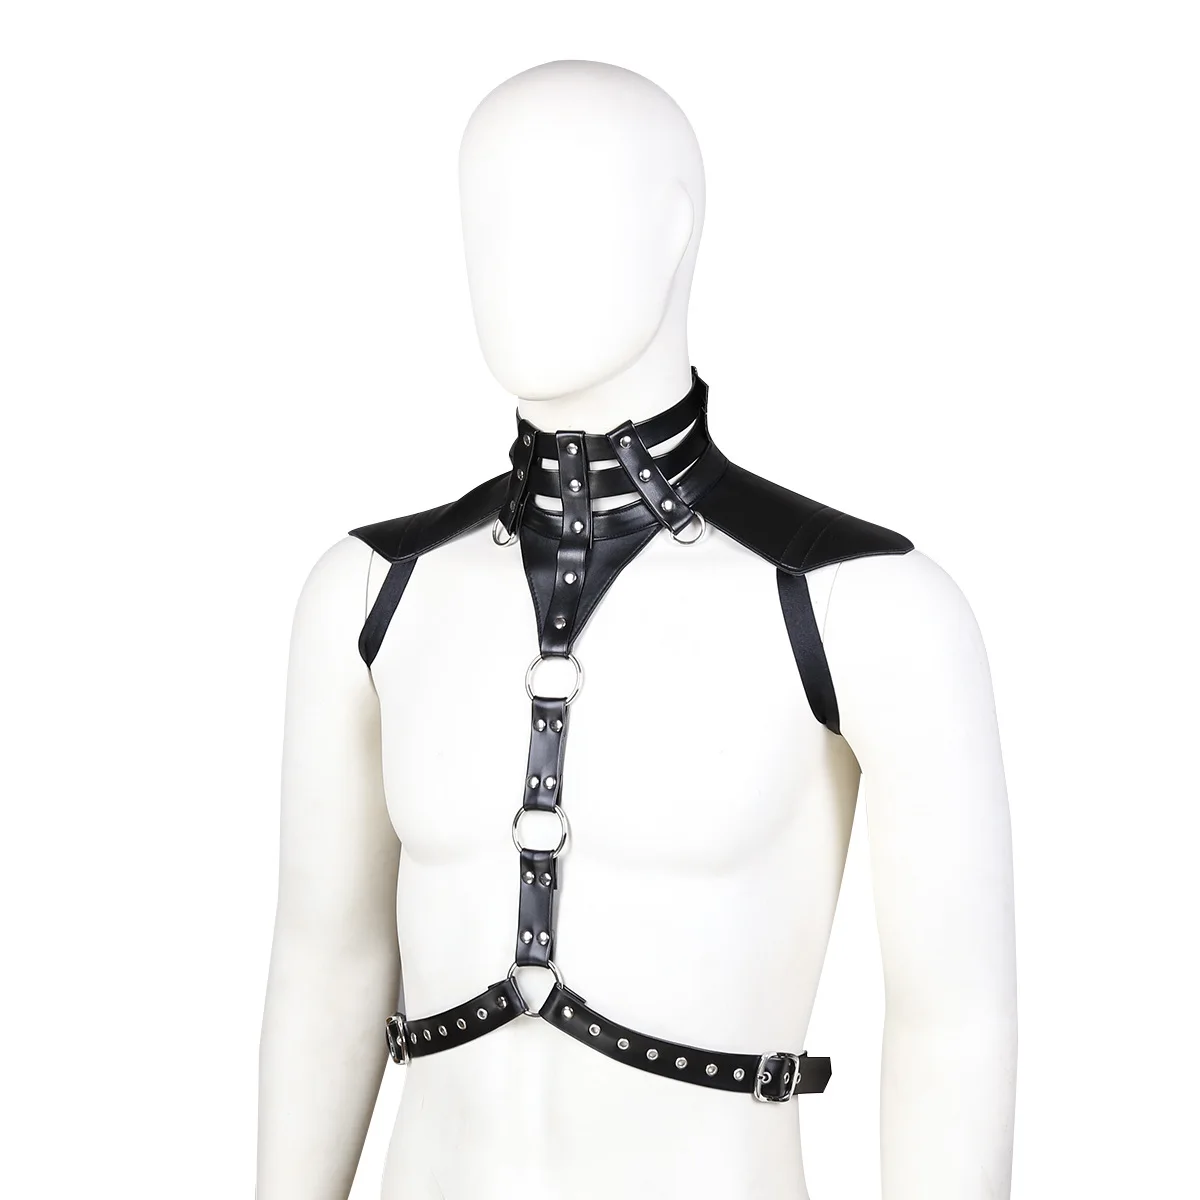 Wholesale SacKnove 19116 Cool Shoulder Chest Bdsm Bondage Suit Strap Men  Adult Sexy Leather Costumes Male Gays Fetish Body Harness Set From  m.